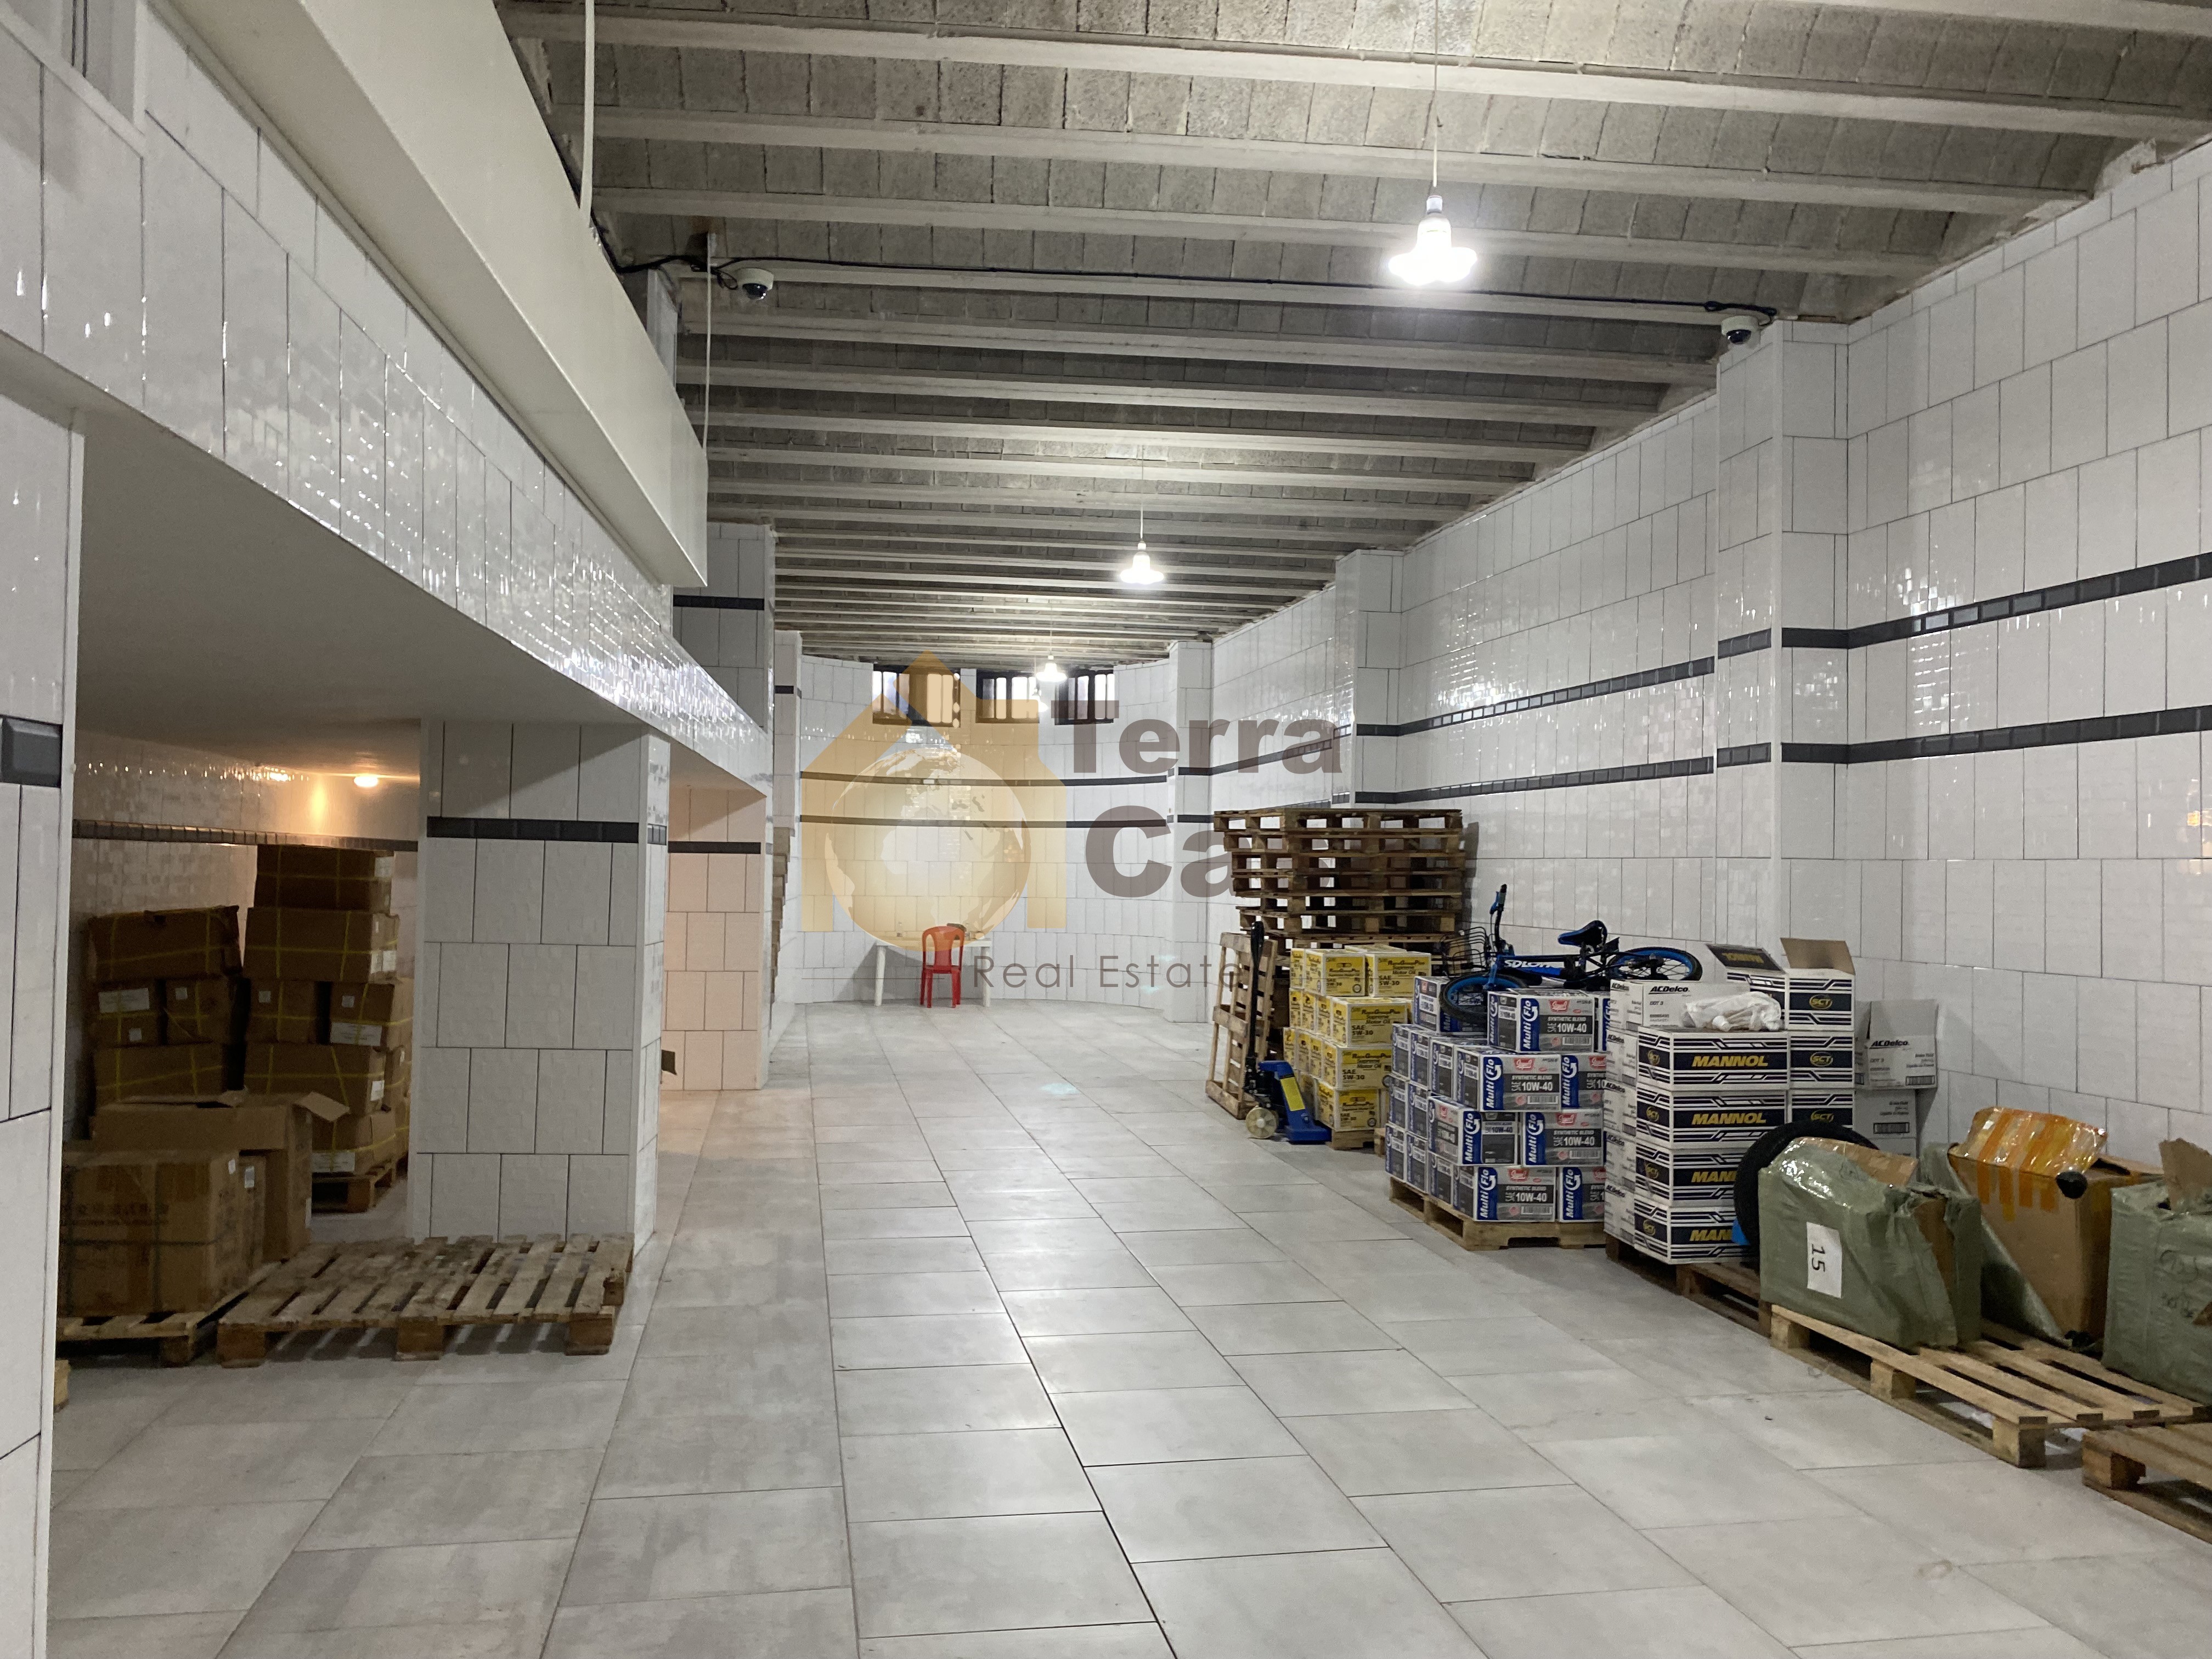 Warehouse for rent located in Zouk Mosbeh